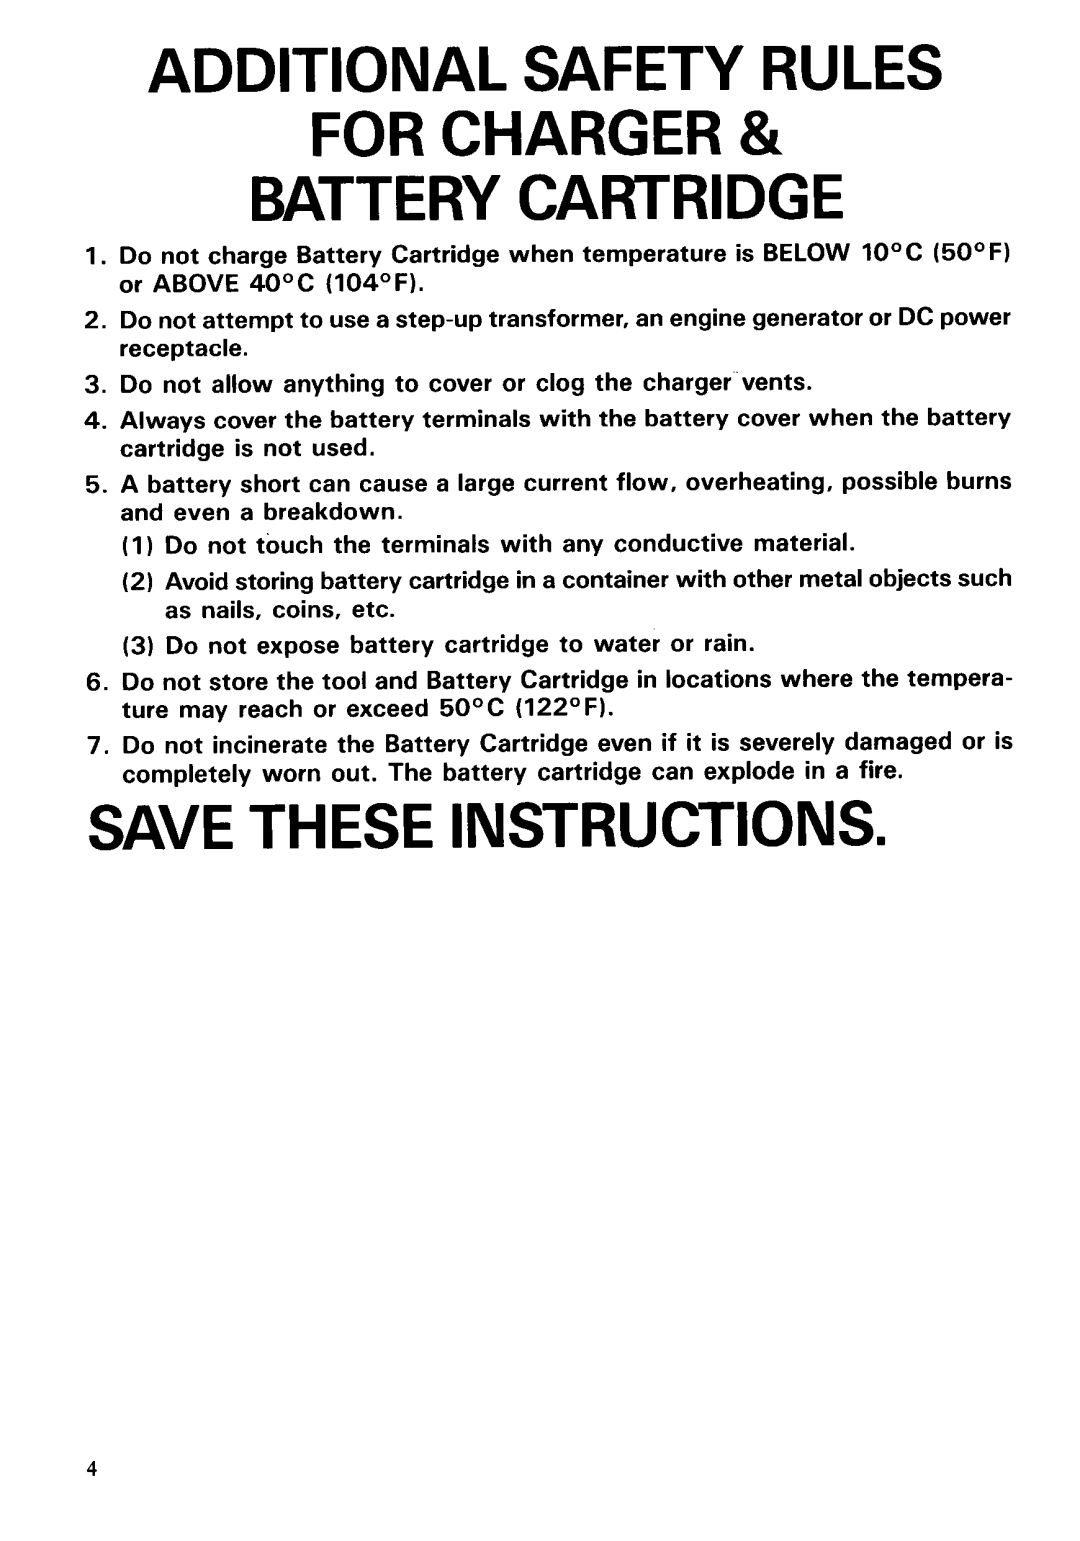 Makita 4071D dimensions Additional Safety Rules For Charger, Battery Cartridge, Save These Instructions 